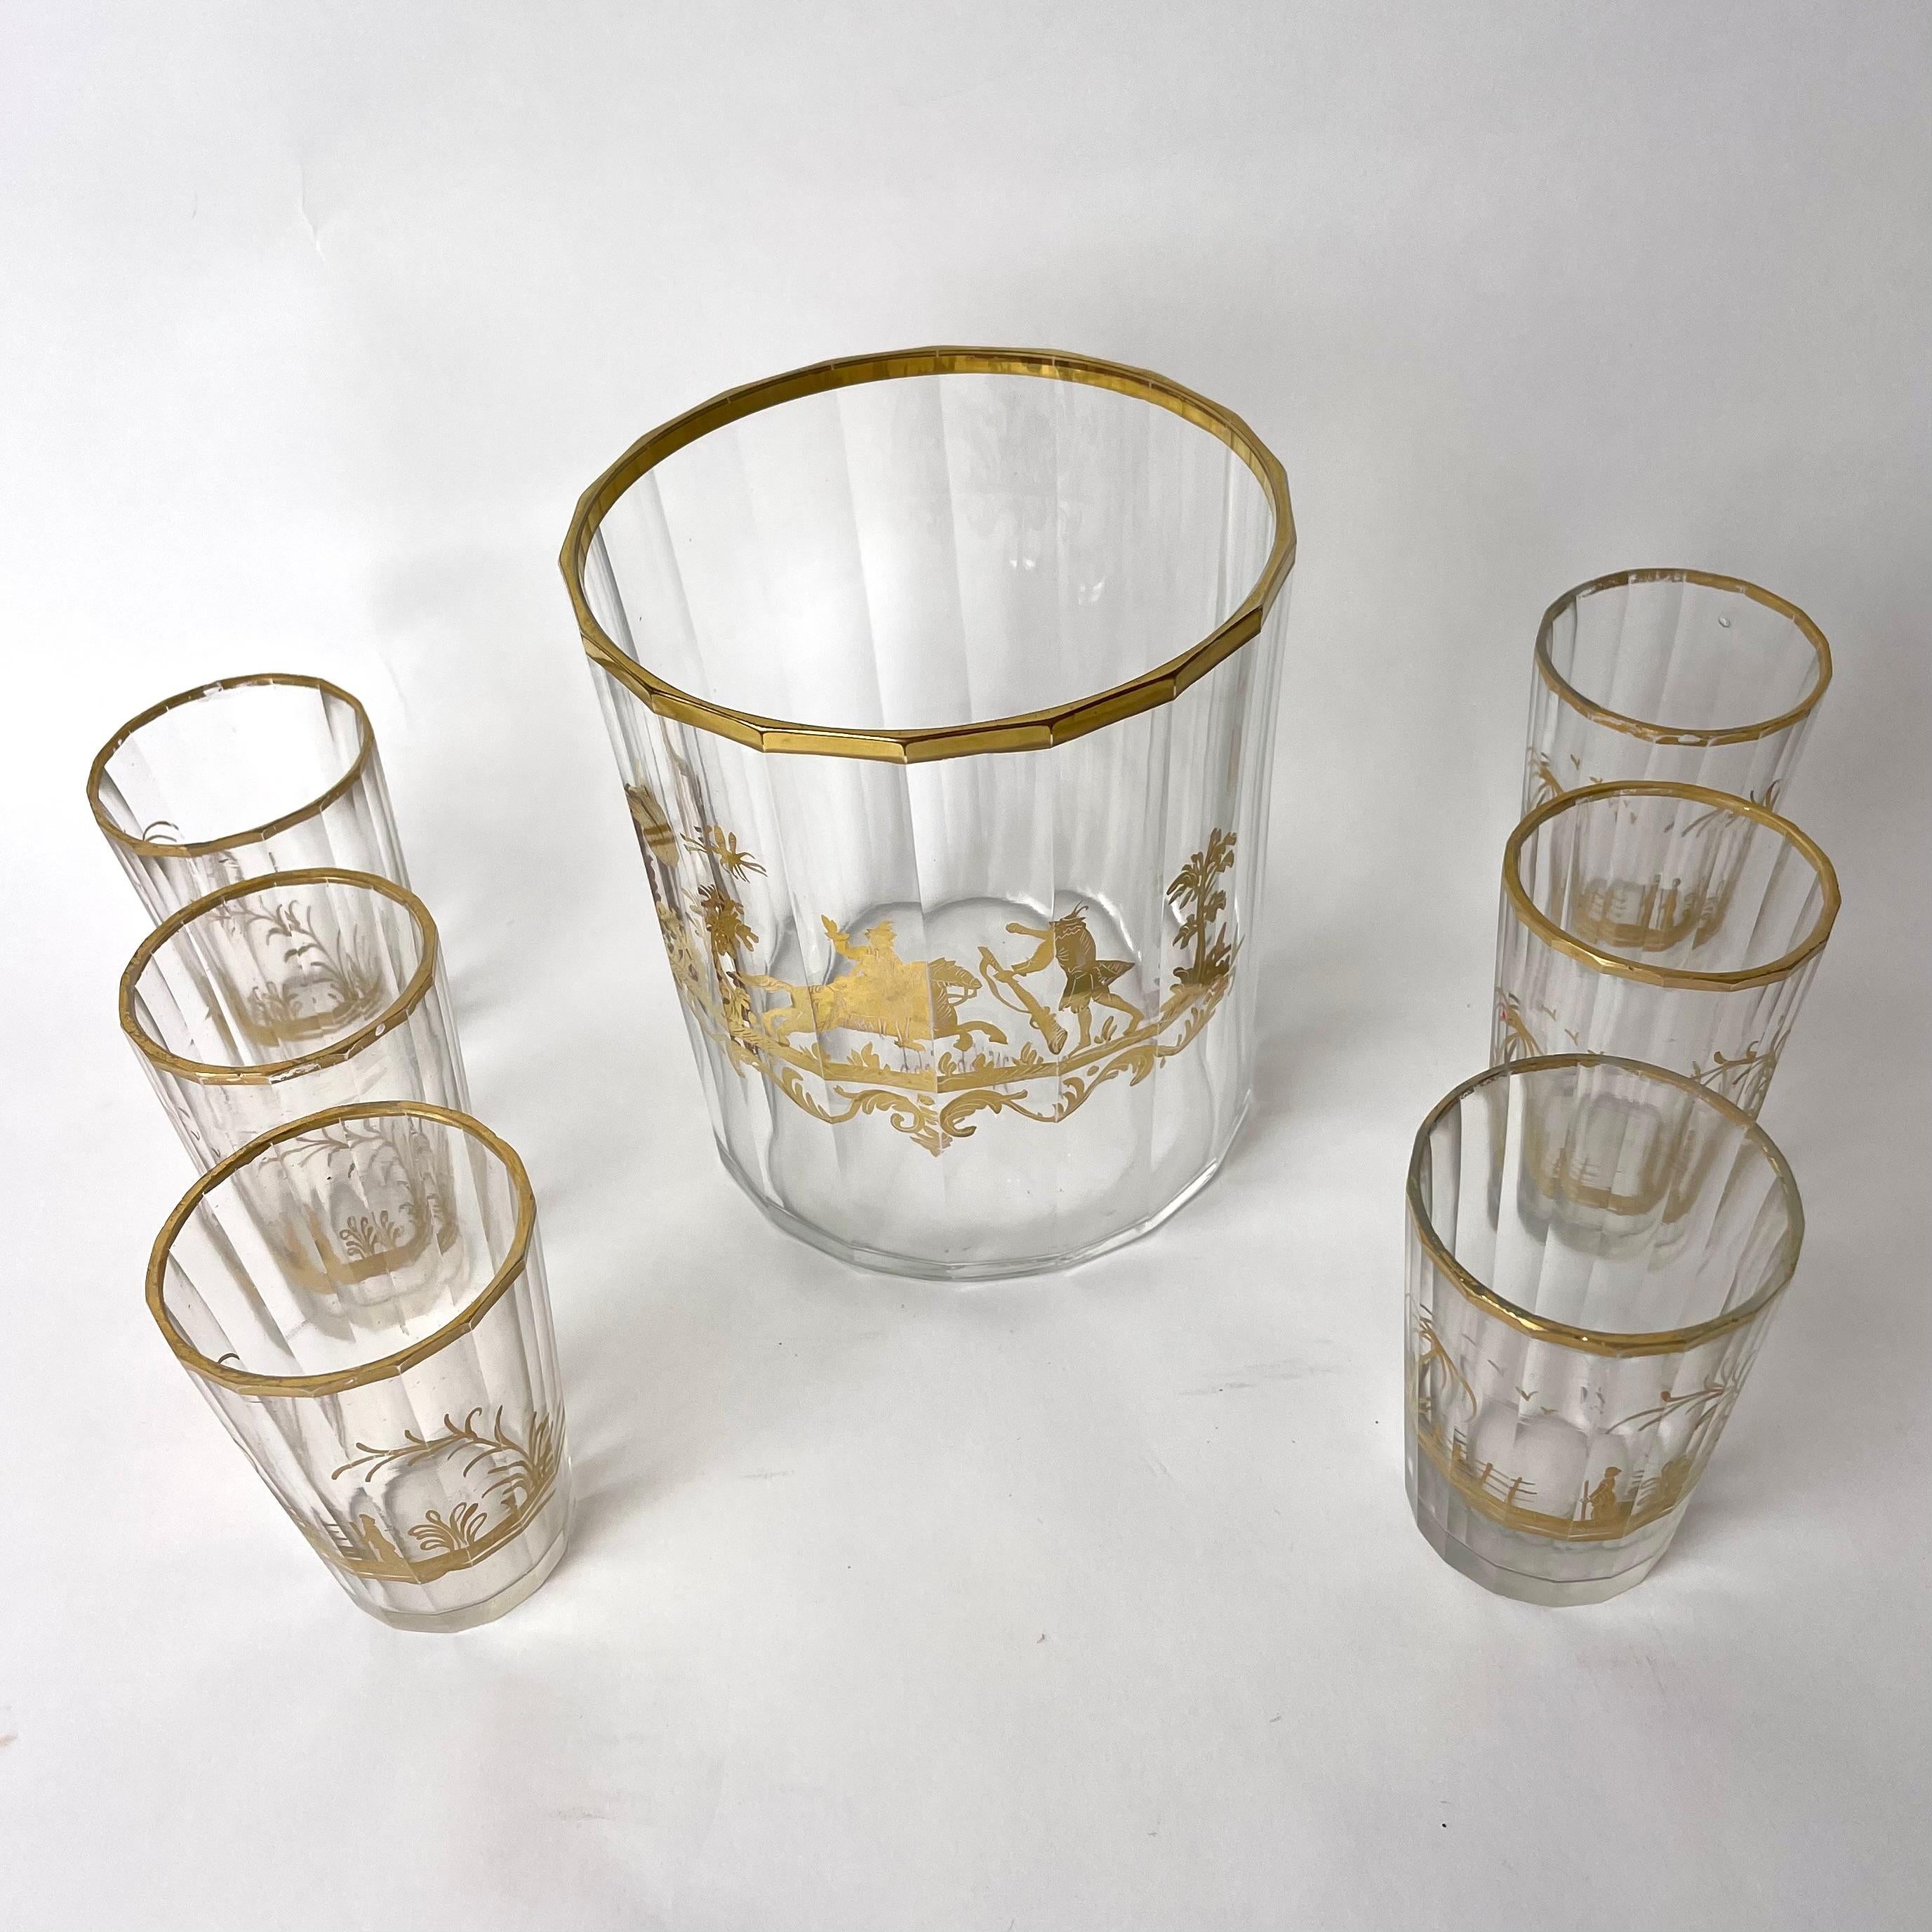 Elegant Vodka Set in Crystal Glass from the first half of the 19th Century. Beautiful gilded decoration on the vodka bowl and the six accompanying glasses. 

Dimensions:

Bowl, height 14 cm, diameter 13 cm

Six glasses, height 8,5 cm, diameter 5,5